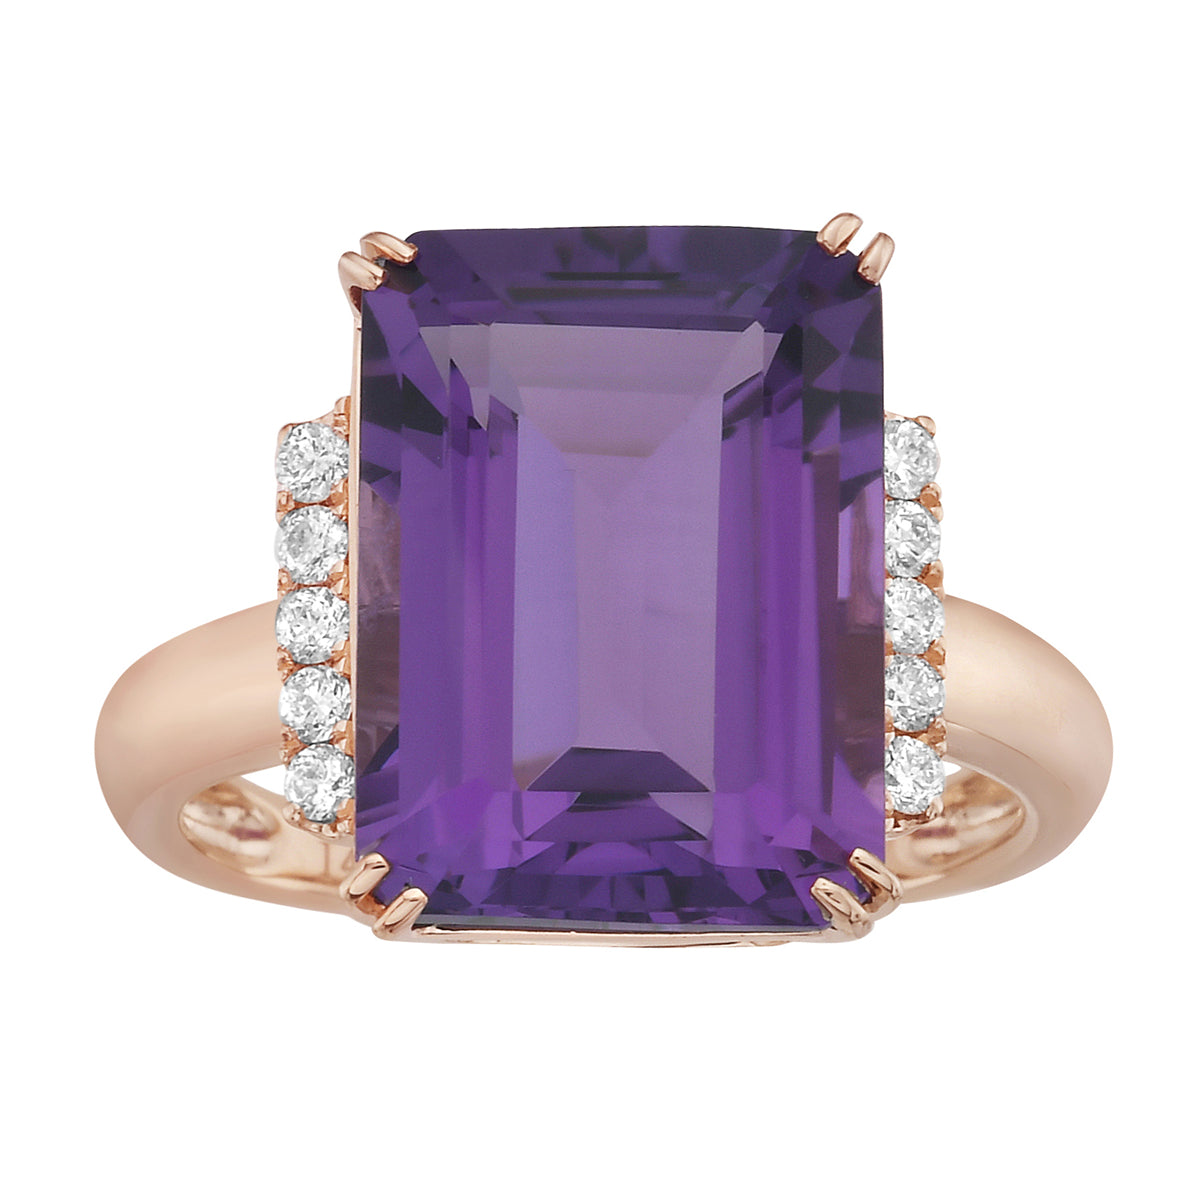 Ring 14KR/3.8G 1AME-7.32CT 10RD-0.14CT Amethyst